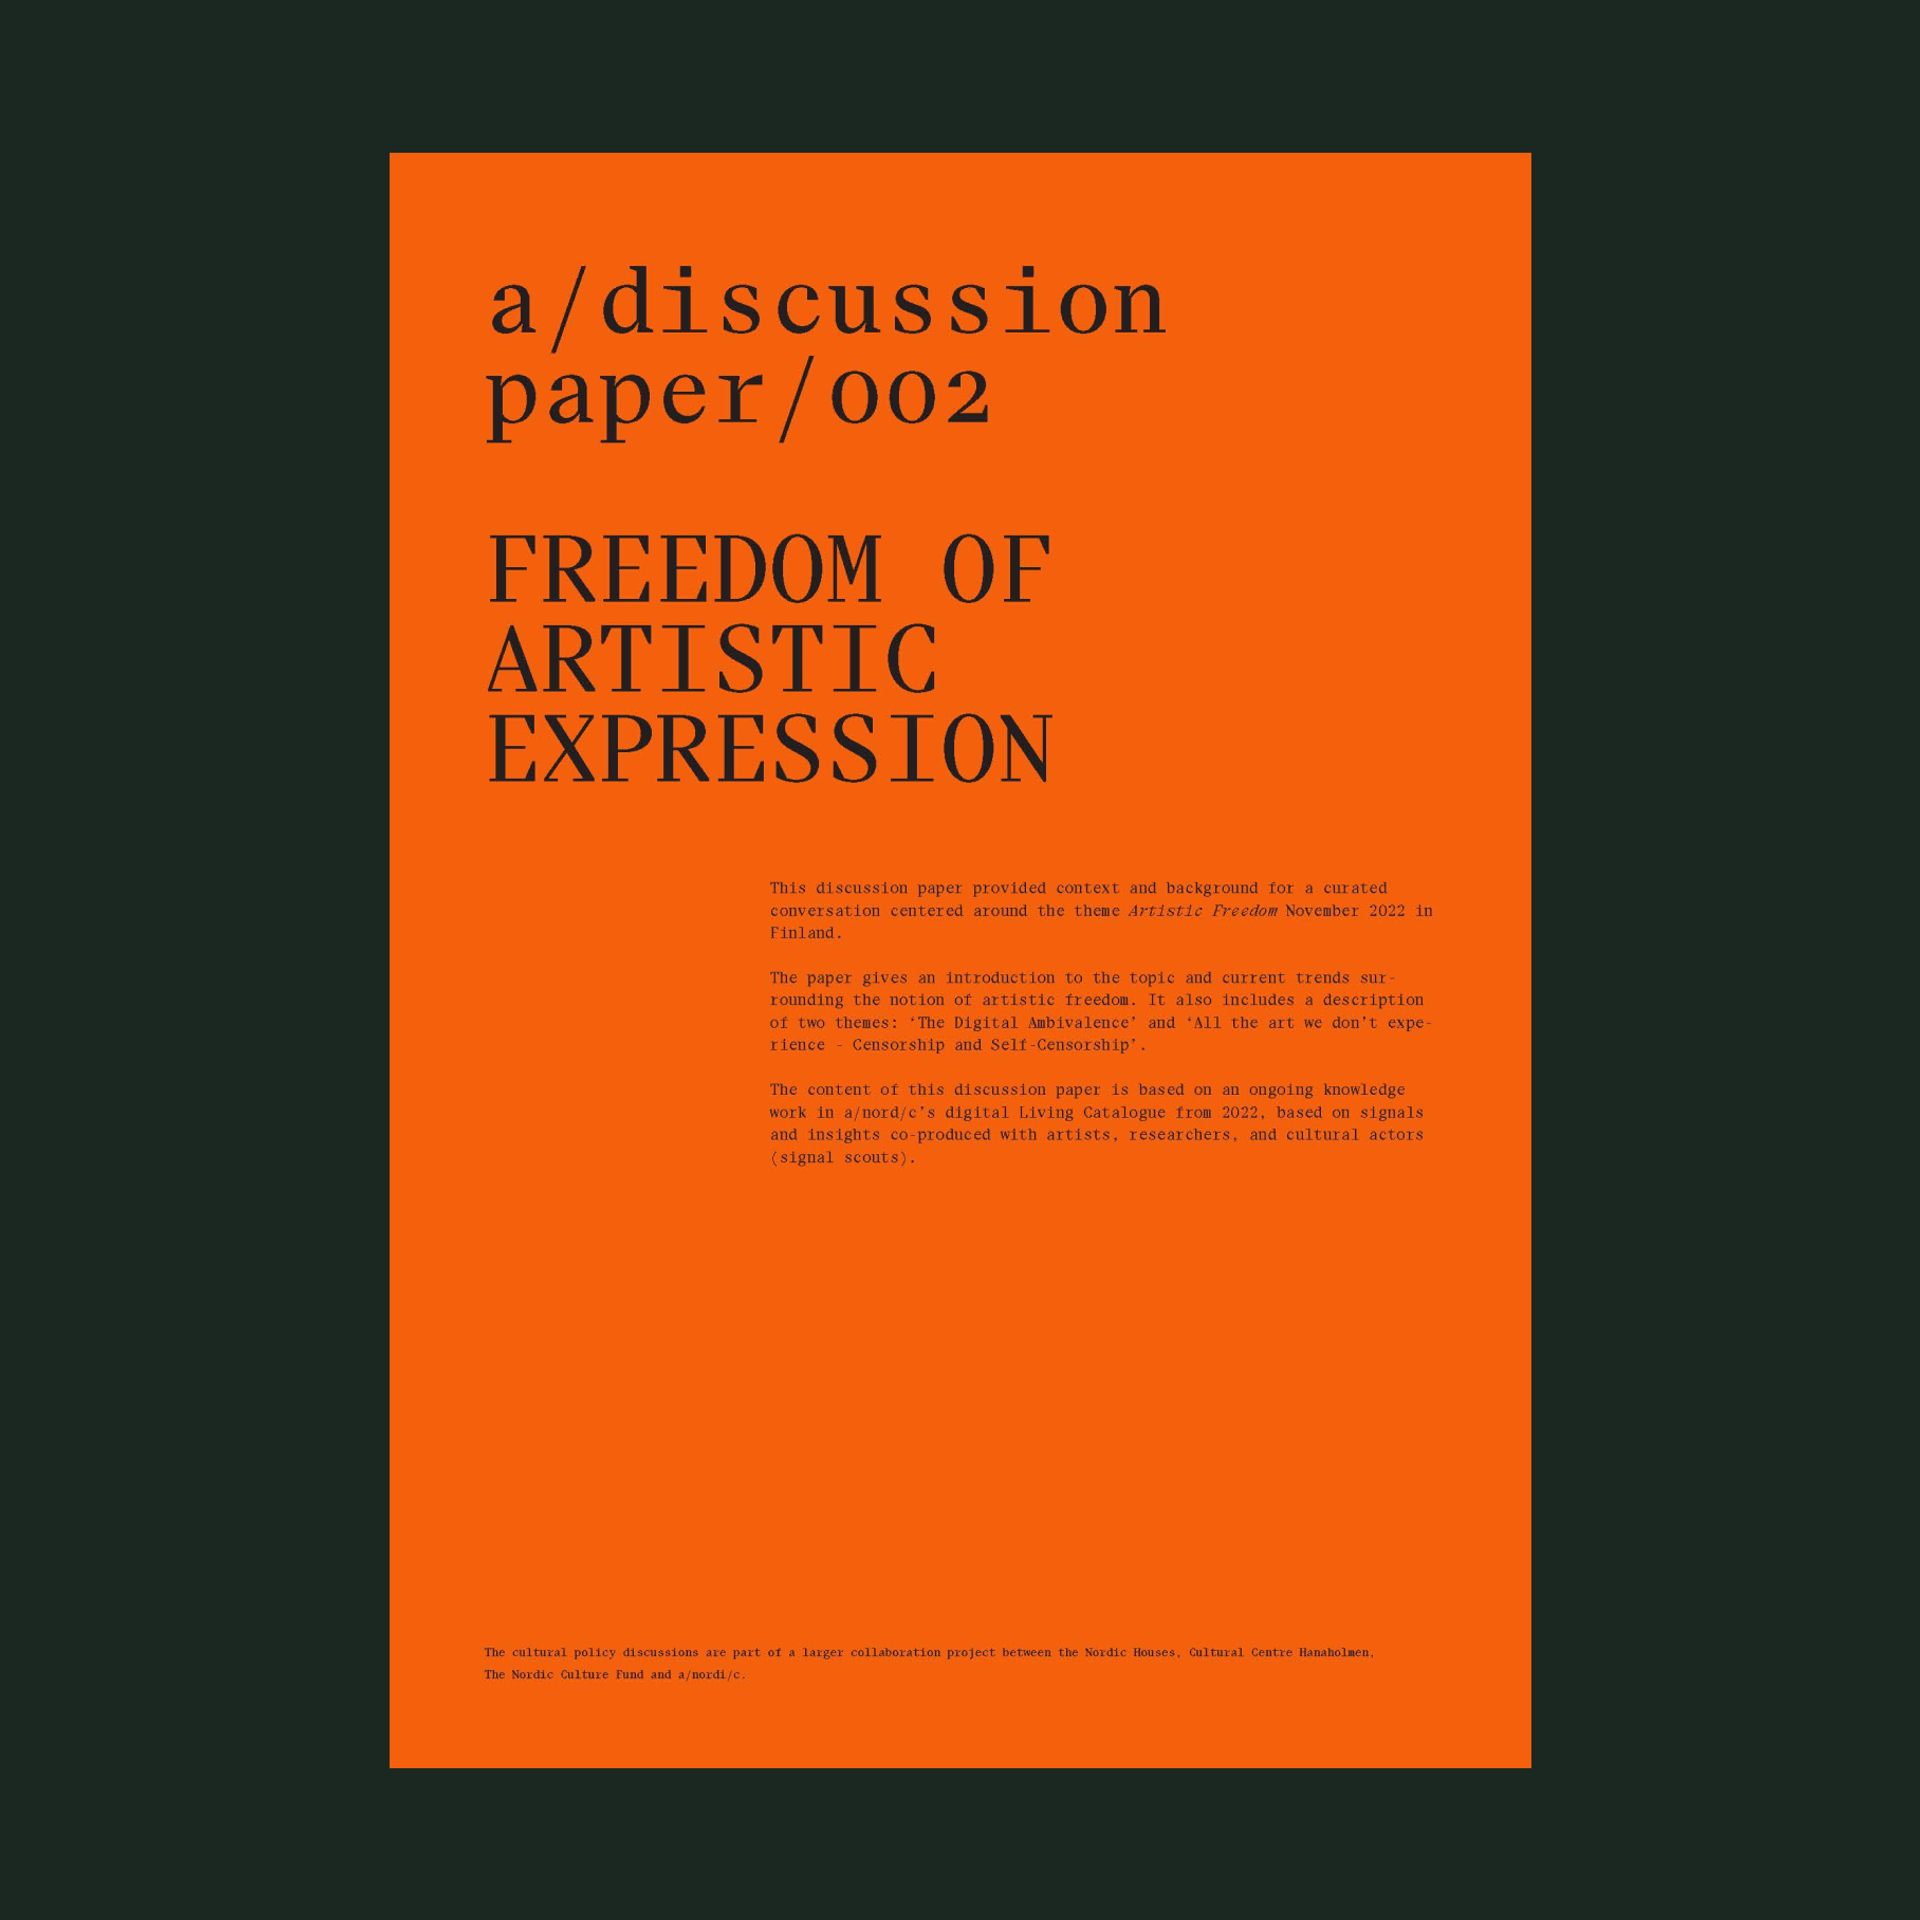 Image of the publication